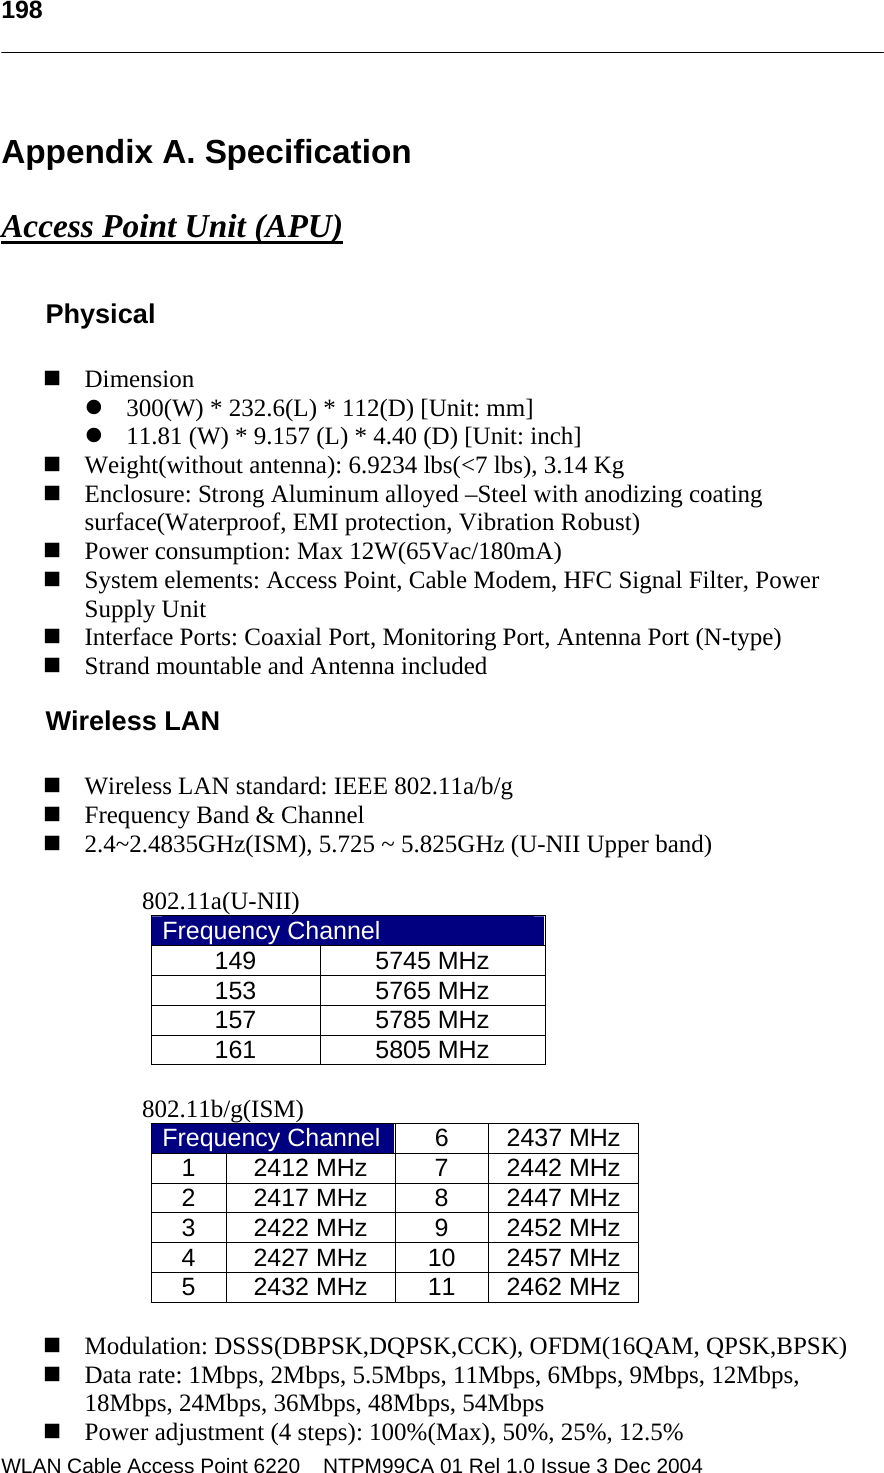   198   WLAN Cable Access Point 6220    NTPM99CA 01 Rel 1.0 Issue 3 Dec 2004 Appendix A. Specification  Access Point Unit (APU)  Physical   Dimension z 300(W) * 232.6(L) * 112(D) [Unit: mm] z 11.81 (W) * 9.157 (L) * 4.40 (D) [Unit: inch]  Weight(without antenna): 6.9234 lbs(&lt;7 lbs), 3.14 Kg  Enclosure: Strong Aluminum alloyed –Steel with anodizing coating surface(Waterproof, EMI protection, Vibration Robust)  Power consumption: Max 12W(65Vac/180mA)  System elements: Access Point, Cable Modem, HFC Signal Filter, Power Supply Unit   Interface Ports: Coaxial Port, Monitoring Port, Antenna Port (N-type)  Strand mountable and Antenna included Wireless LAN     Wireless LAN standard: IEEE 802.11a/b/g  Frequency Band &amp; Channel  2.4~2.4835GHz(ISM), 5.725 ~ 5.825GHz (U-NII Upper band)  802.11a(U-NII) Frequency Channel 149 5745 MHz 153 5765 MHz 157 5785 MHz 161 5805 MHz  802.11b/g(ISM) Frequency Channel 6 2437 MHz1 2412 MHz  7 2442 MHz2 2417 MHz  8 2447 MHz3 2422 MHz  9 2452 MHz4  2427 MHz  10  2457 MHz5  2432 MHz  11  2462 MHz  Modulation: DSSS(DBPSK,DQPSK,CCK), OFDM(16QAM, QPSK,BPSK)   Data rate: 1Mbps, 2Mbps, 5.5Mbps, 11Mbps, 6Mbps, 9Mbps, 12Mbps, 18Mbps, 24Mbps, 36Mbps, 48Mbps, 54Mbps  Power adjustment (4 steps): 100%(Max), 50%, 25%, 12.5%  